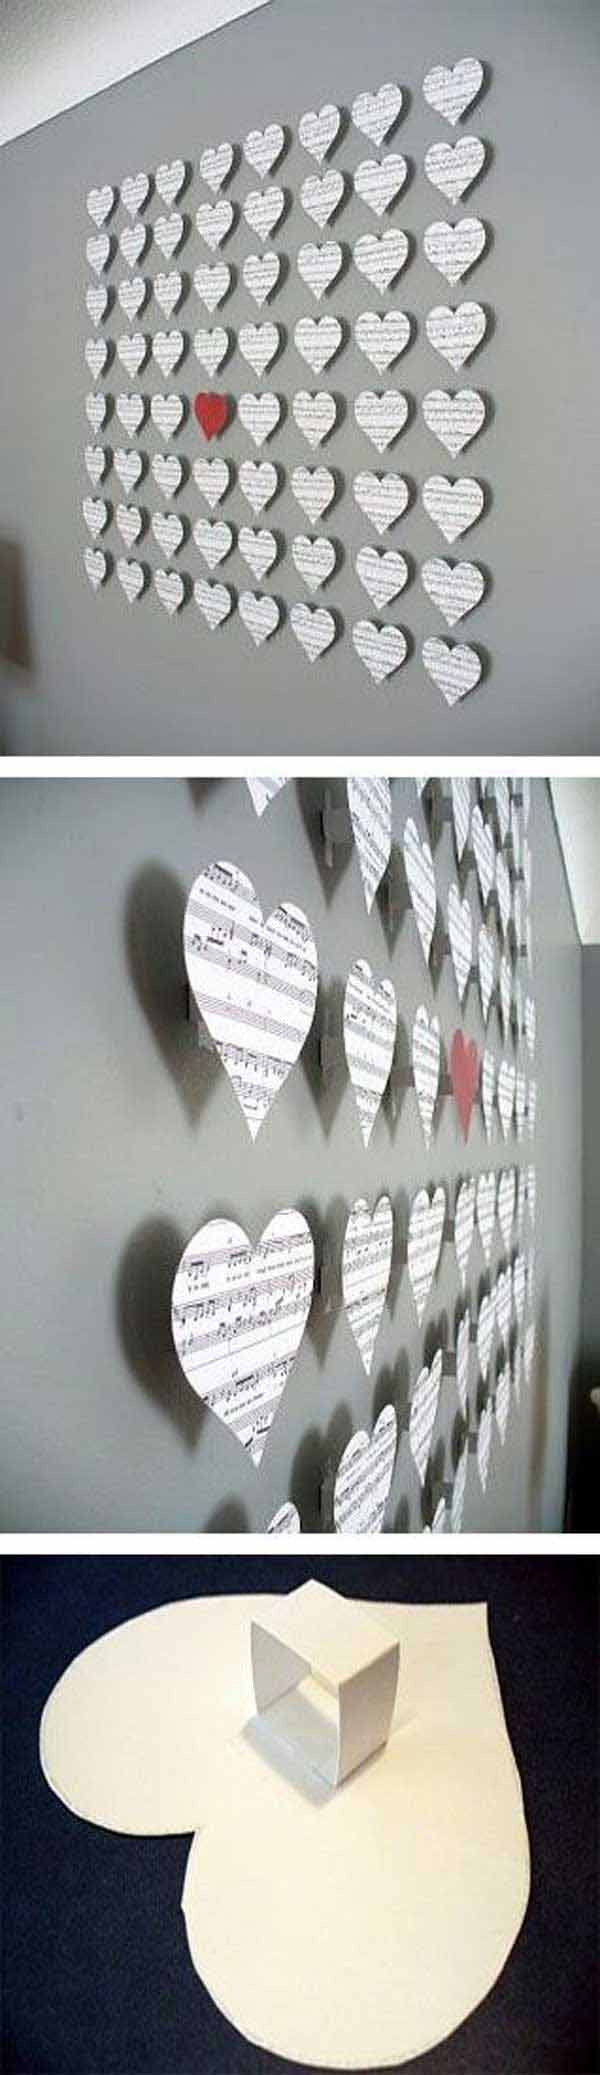 DIY Wall Decoration Ideas
 26 DIY Cool And No Money Decorating Ideas for Your Wall